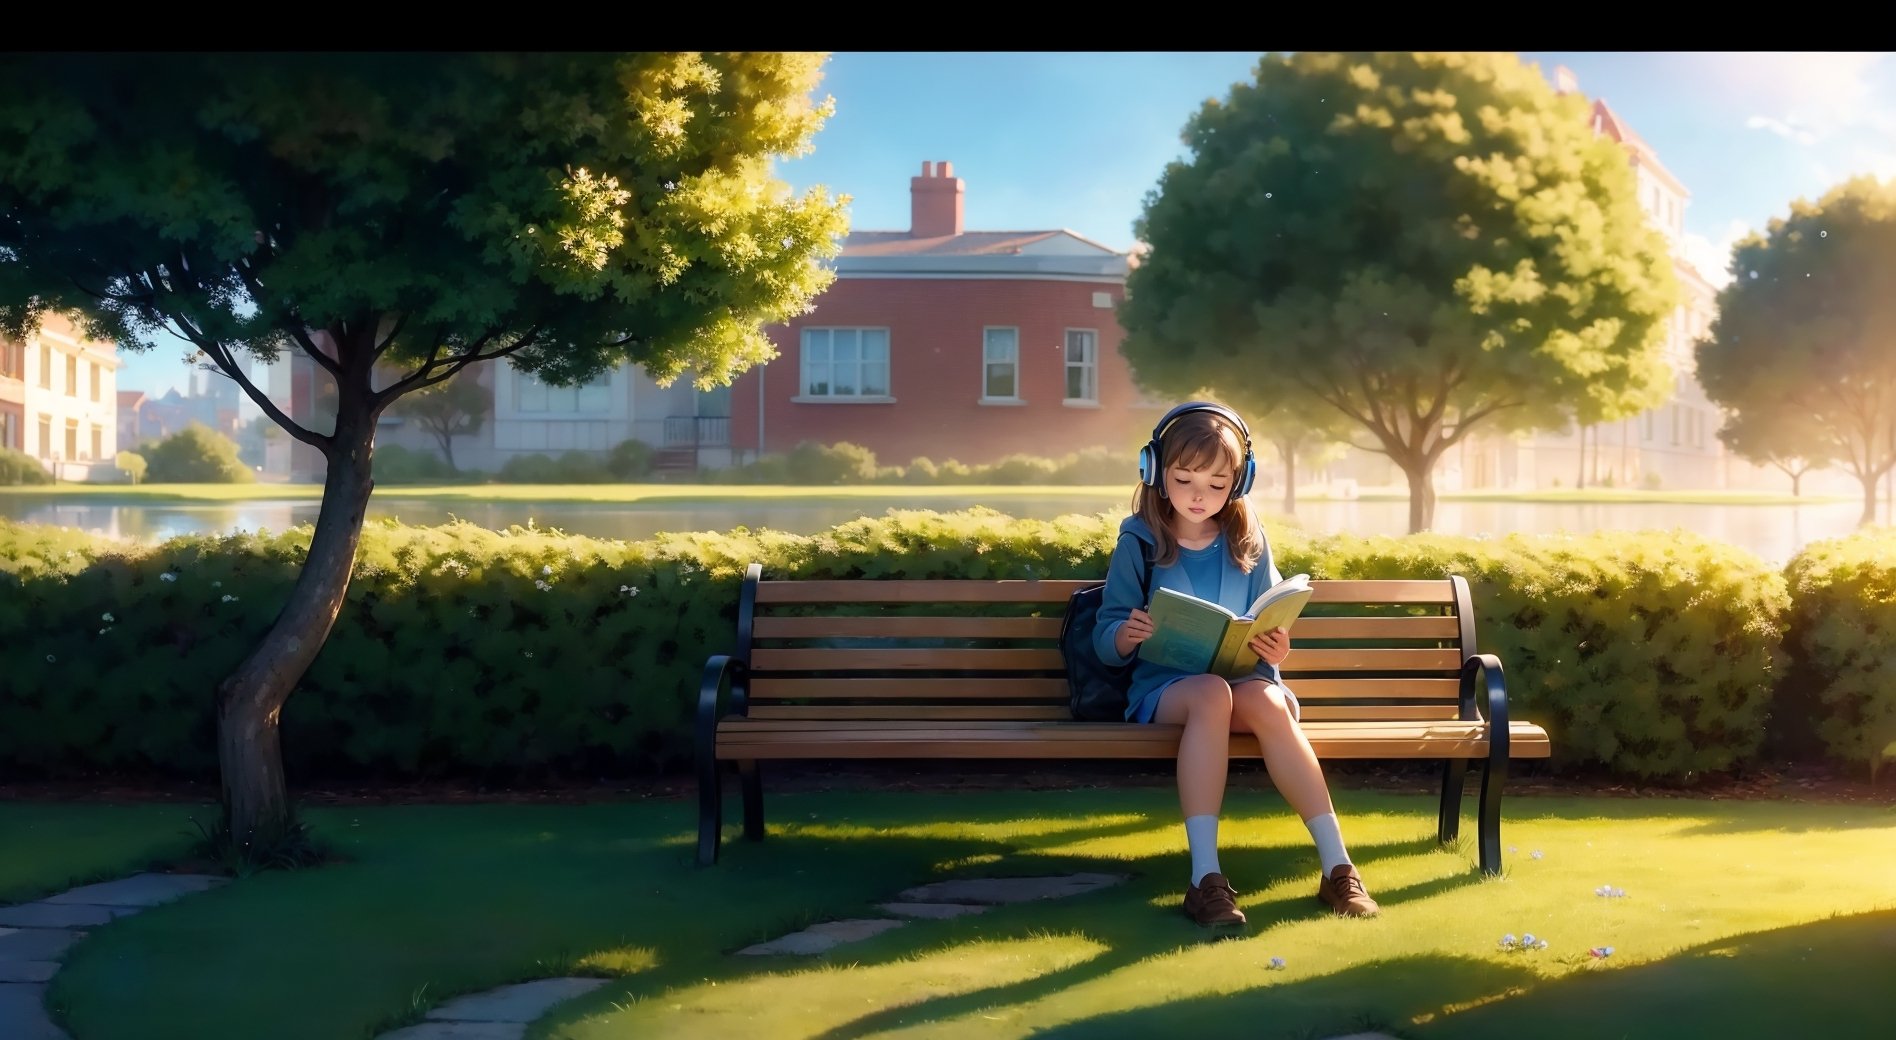 fine art, digital painting, amazing sky, pixar style,
.
 Woman, reading book, Wear headphones, aesthetic, digital illustration, soft colors, cozy outdoors, cup of coffee, potted plant, bench, tree, grass, water reflection, melancholic atmosphere, side view, flower, windy, 
.
cute, storybook detailed llustration, cinematic, ultra highly detailed, tiny details, beautiful details, vibrant colors